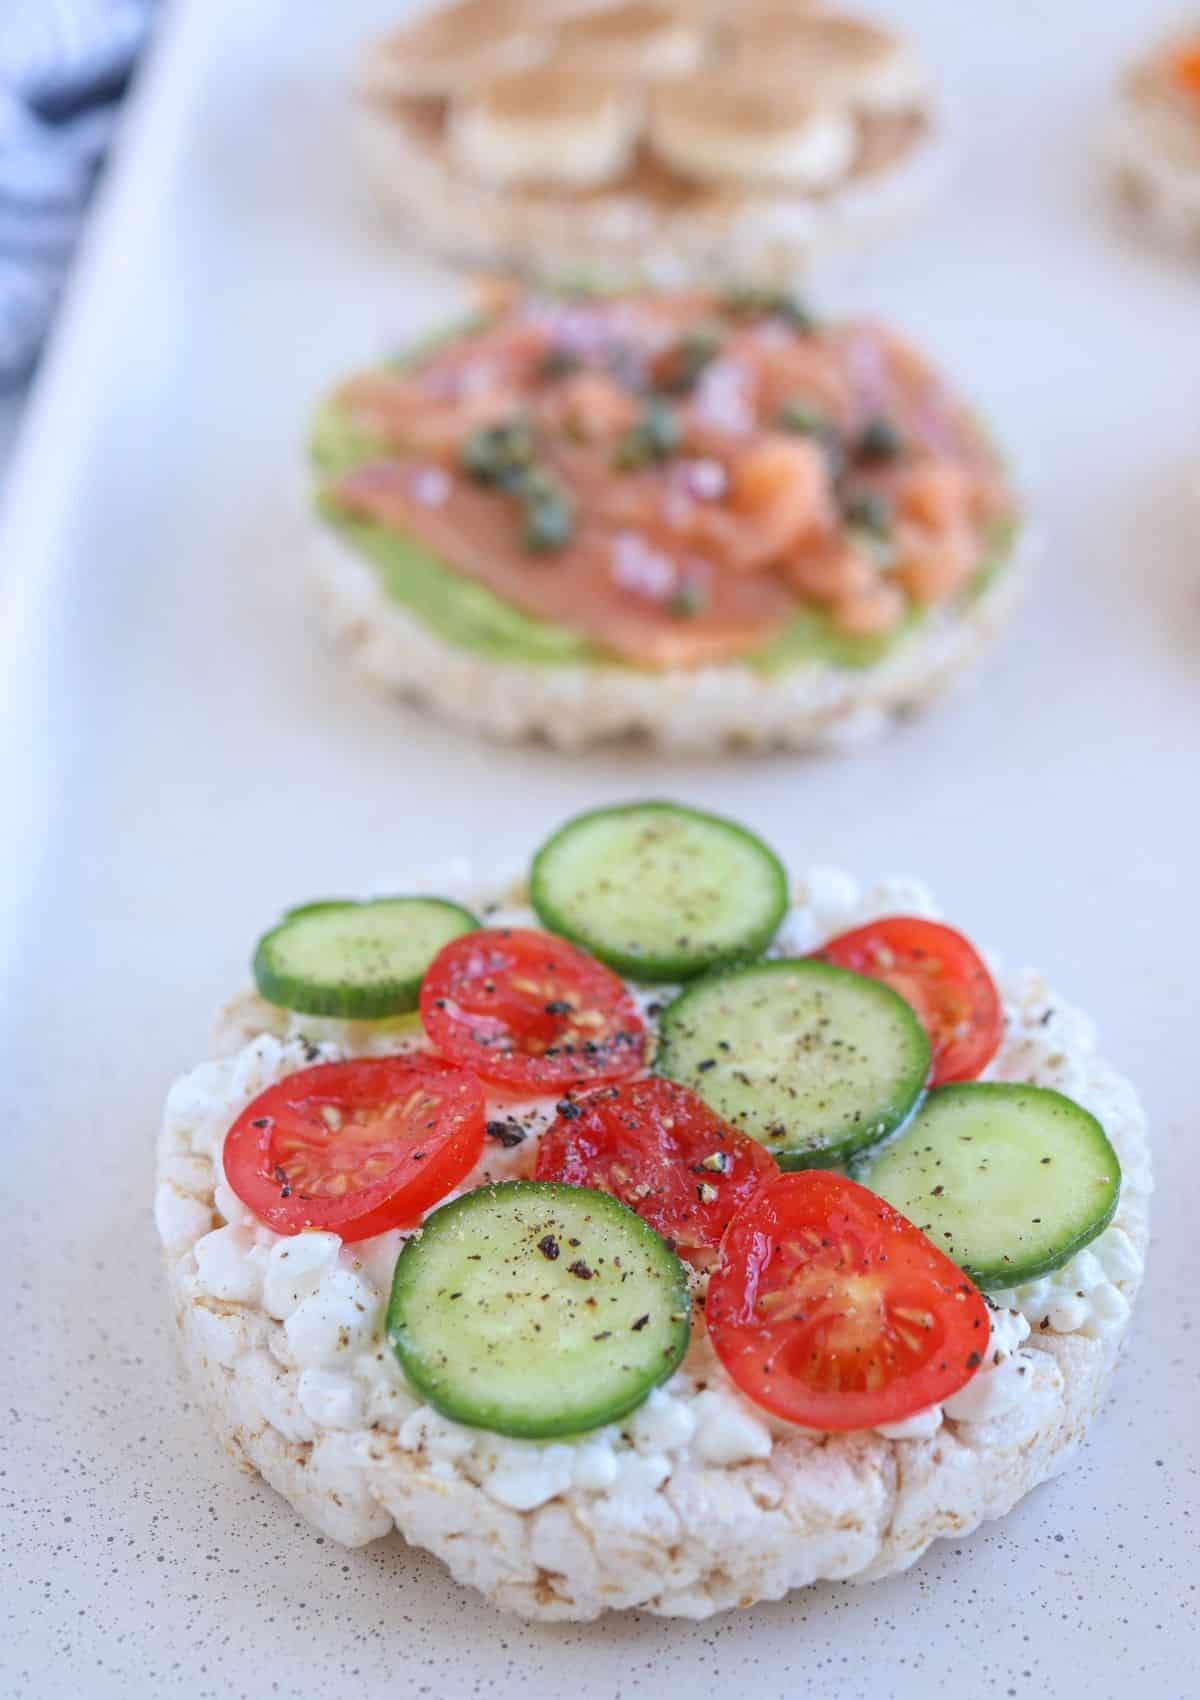 rice cake topped with cottage cheese, tomato, cucumber, salt and pepper.